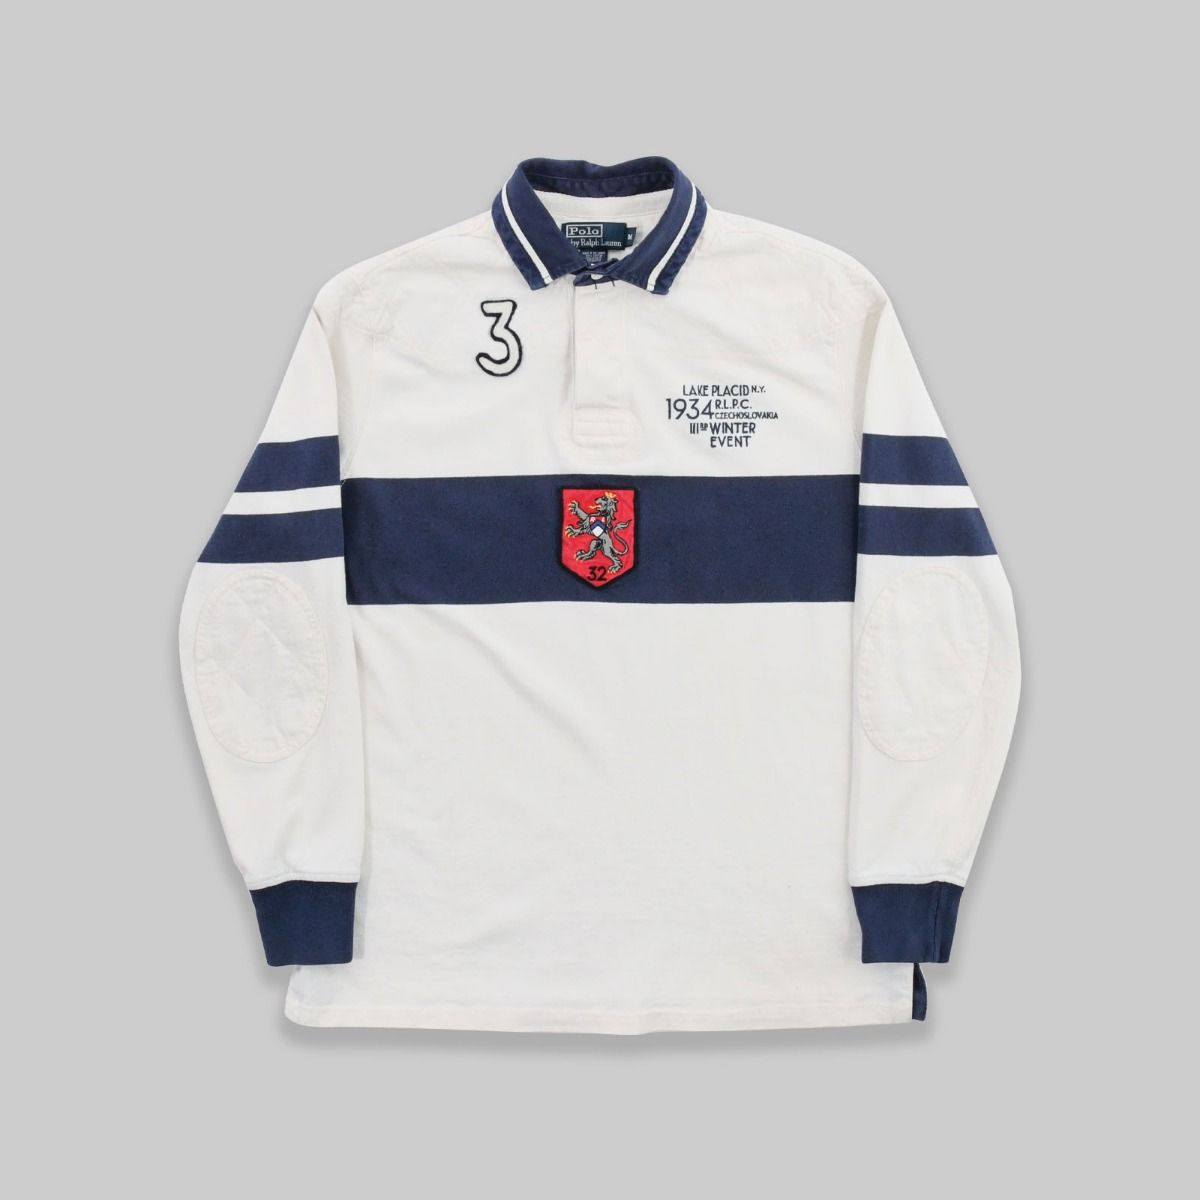  Ralph Lauren Lake Placid NY 1934 Winter Event Rugby Shirt